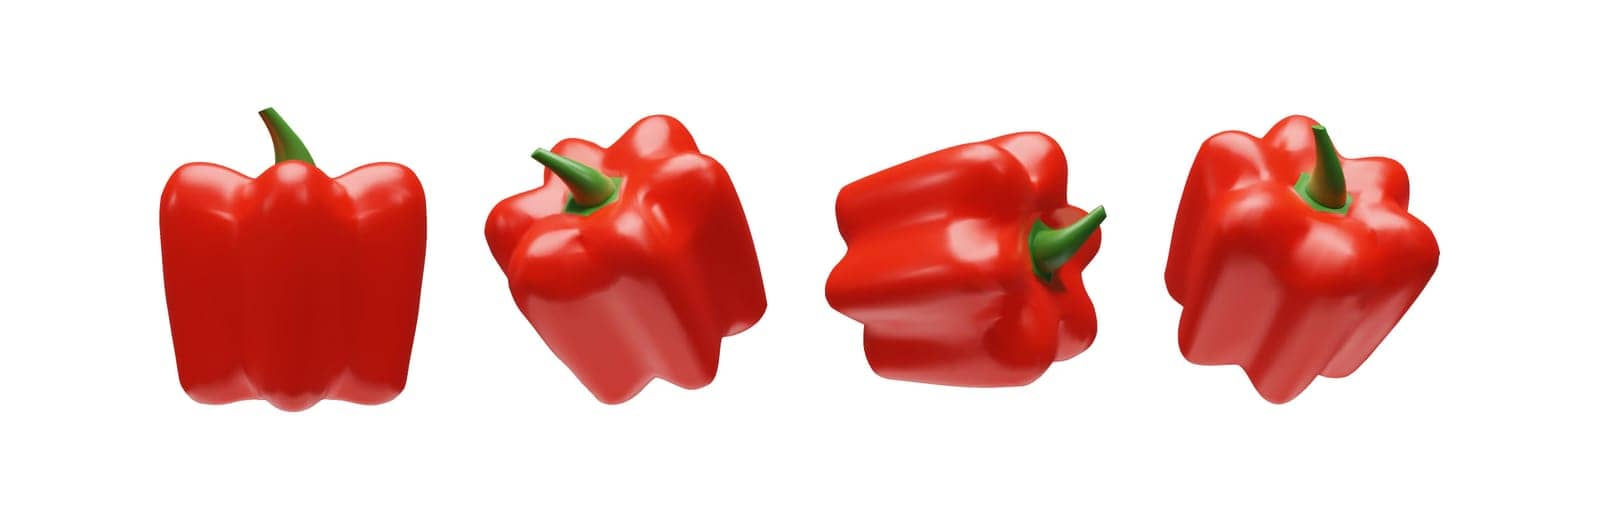 Set of 3D render red bell pepper. Realistic whole paprika. Tasty fresh ingredient for Asian, Mexican, Bulgarian food. Healthy organic vitamin vegetable. Vector illustration sweet object collection